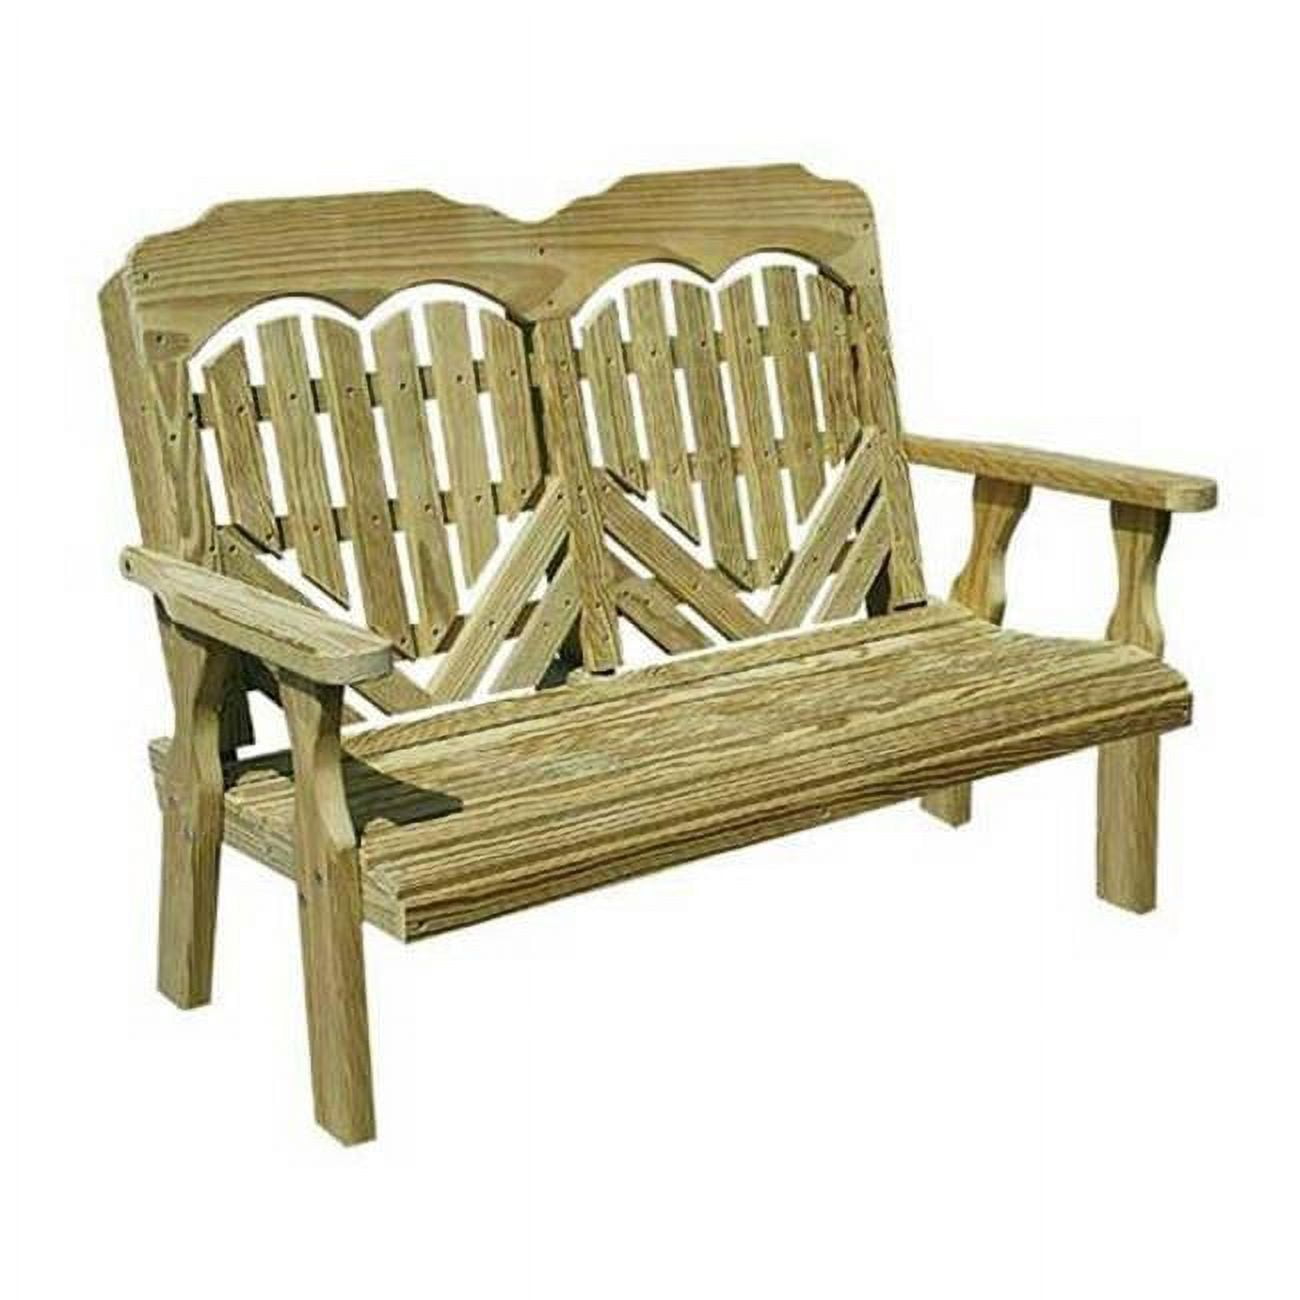 Fpb48hbcvd 53 In. Treated Pine Heartback Garden Bench